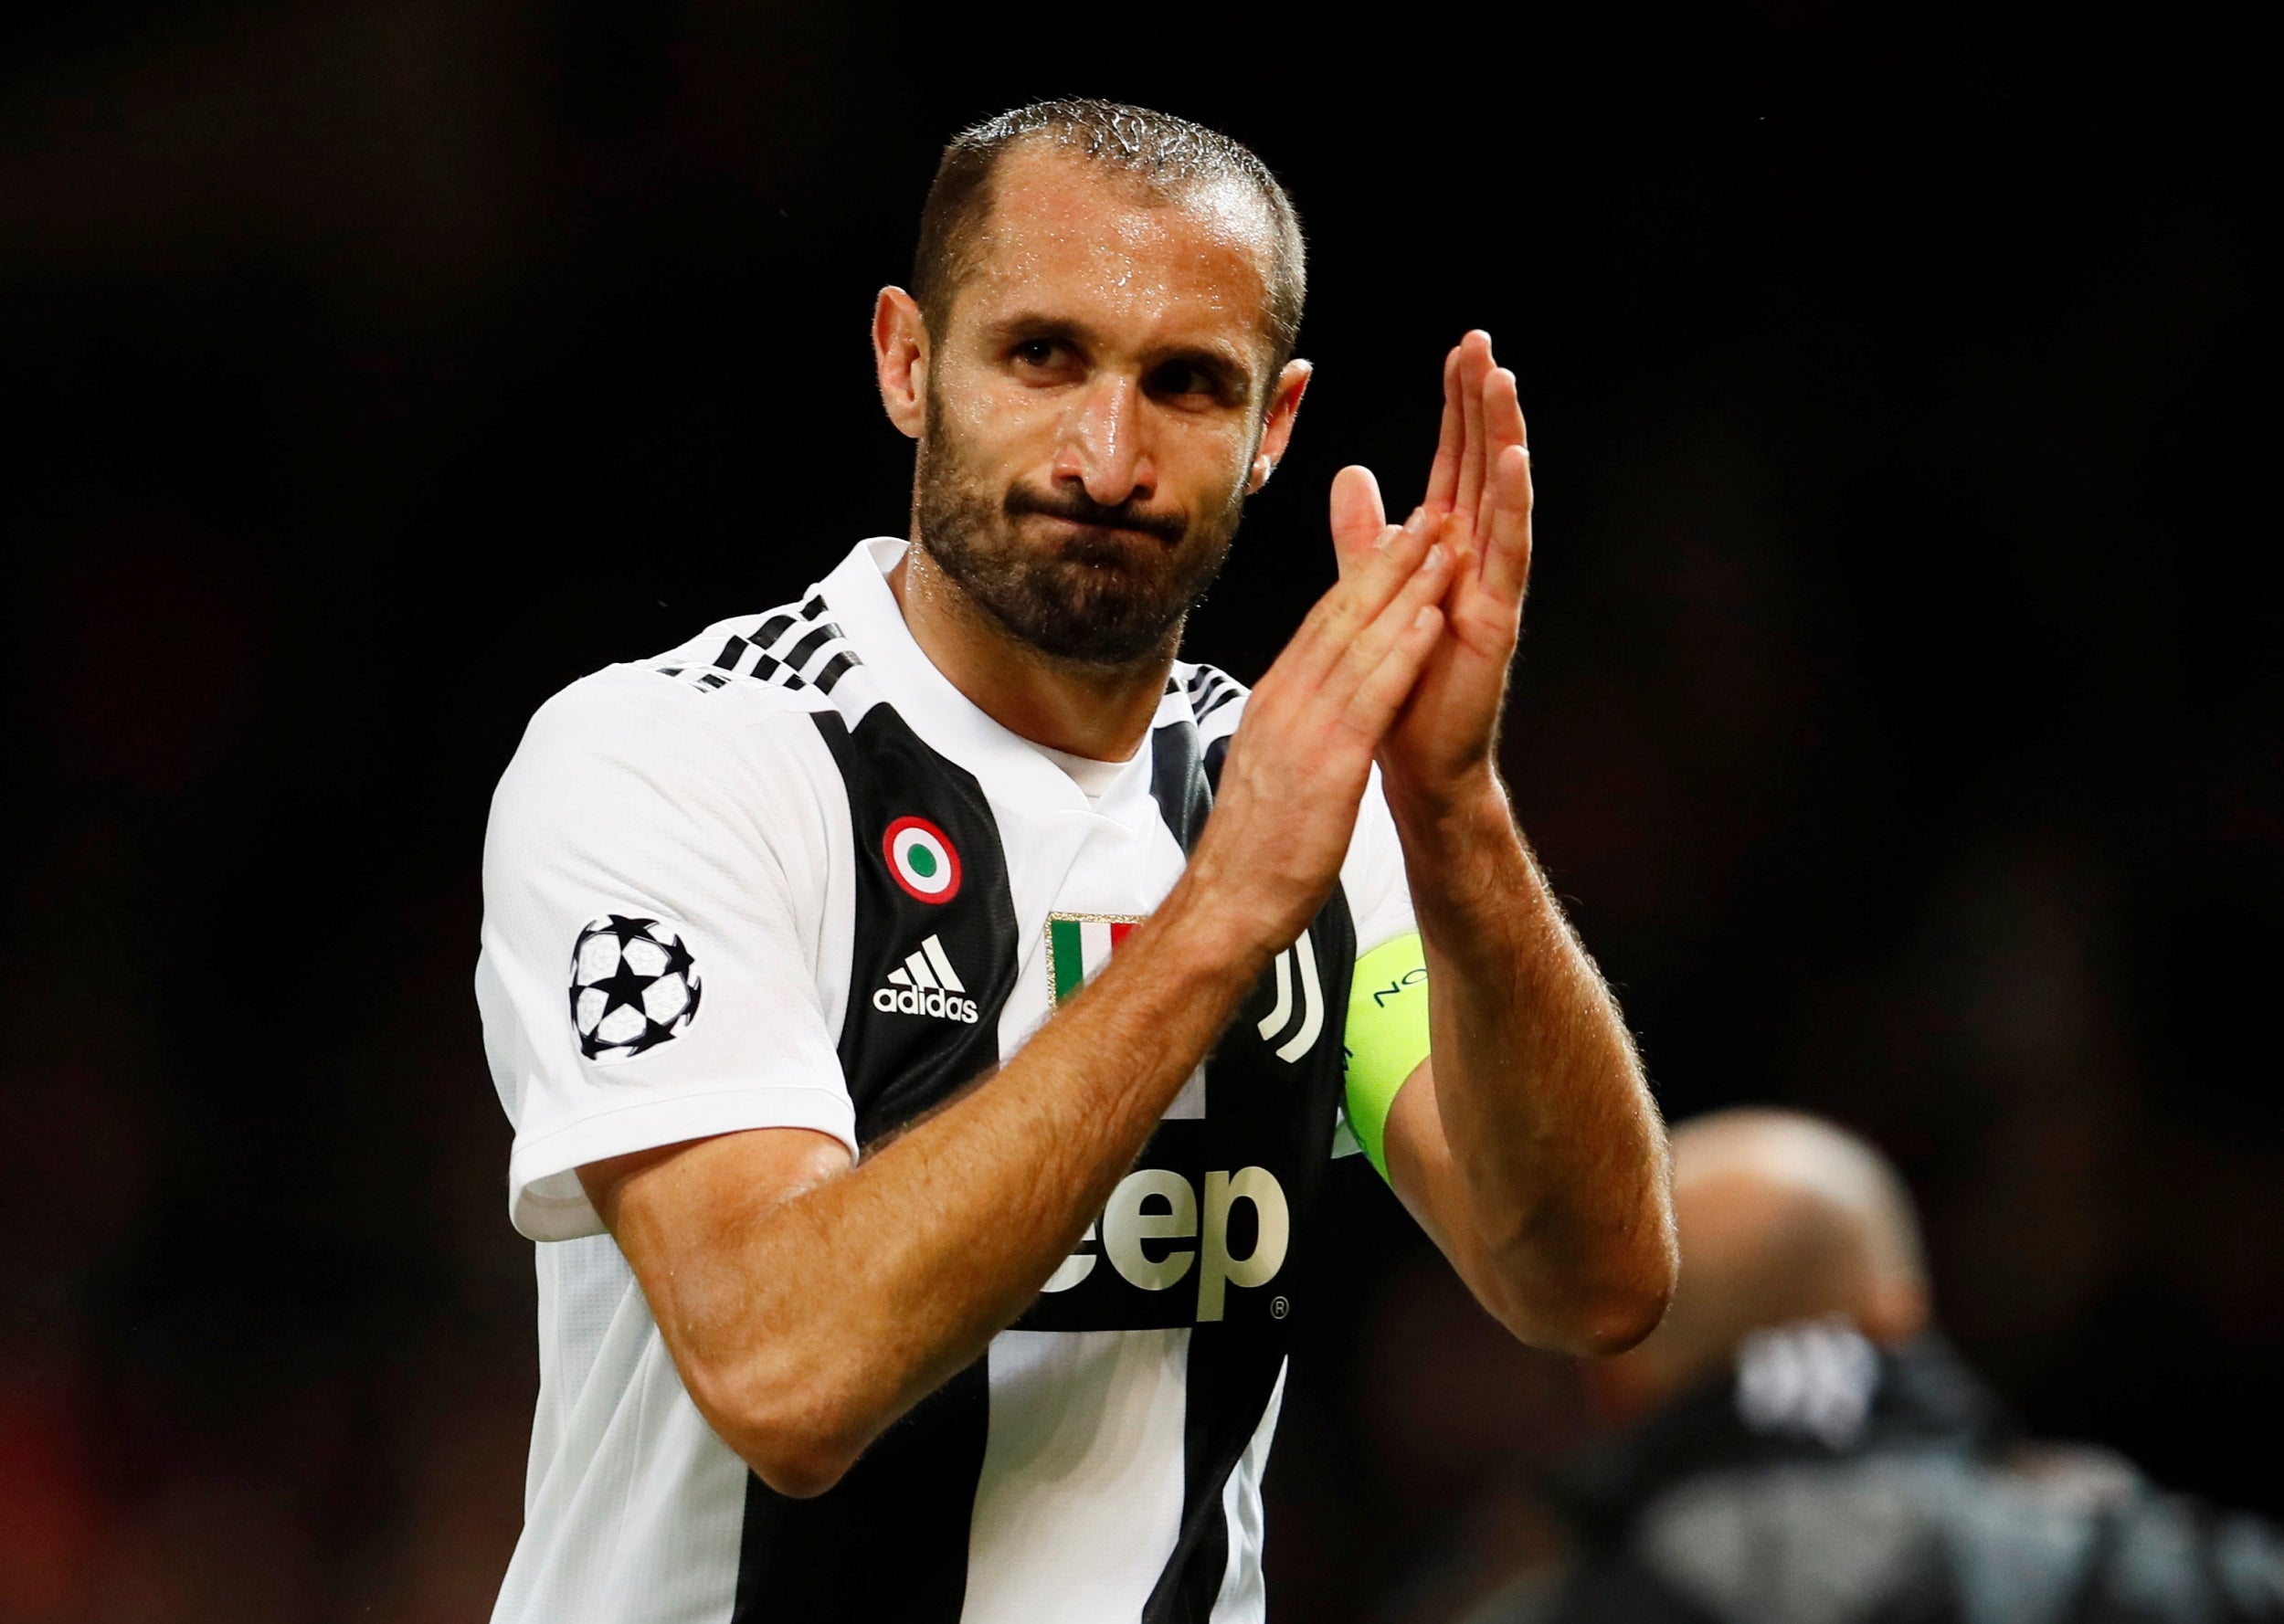 Giorgio Chiellini insists there is no obsession for Juventus